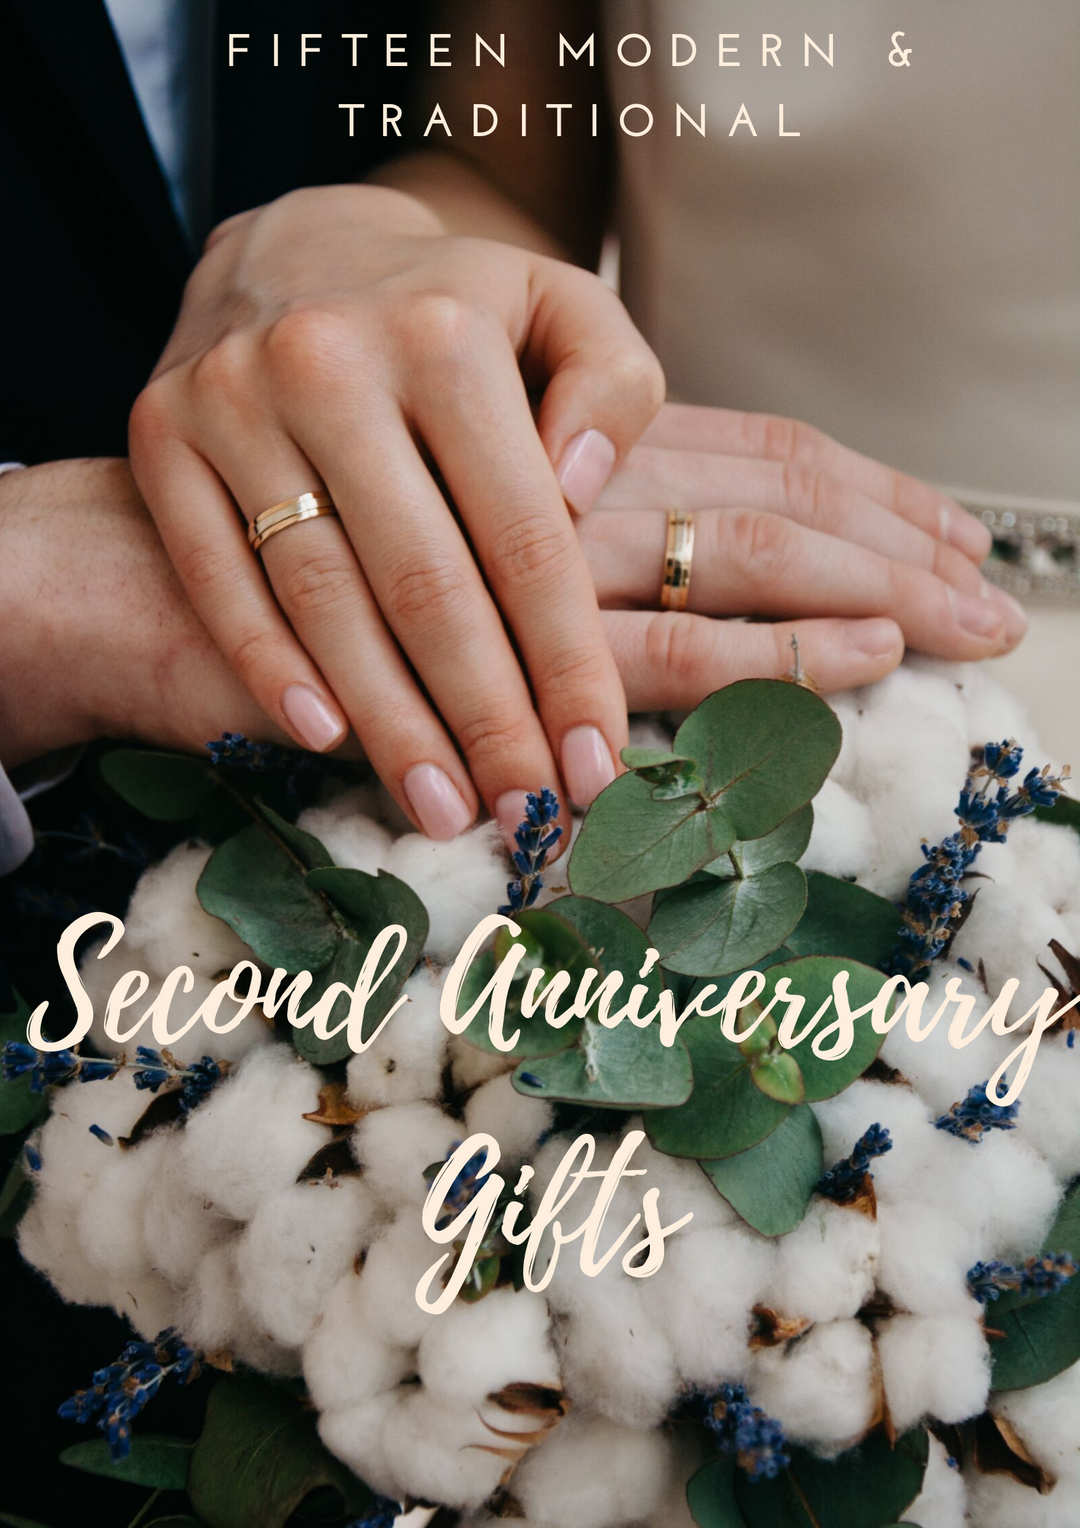 15 Modern And Traditional 2nd Anniversary Gifts